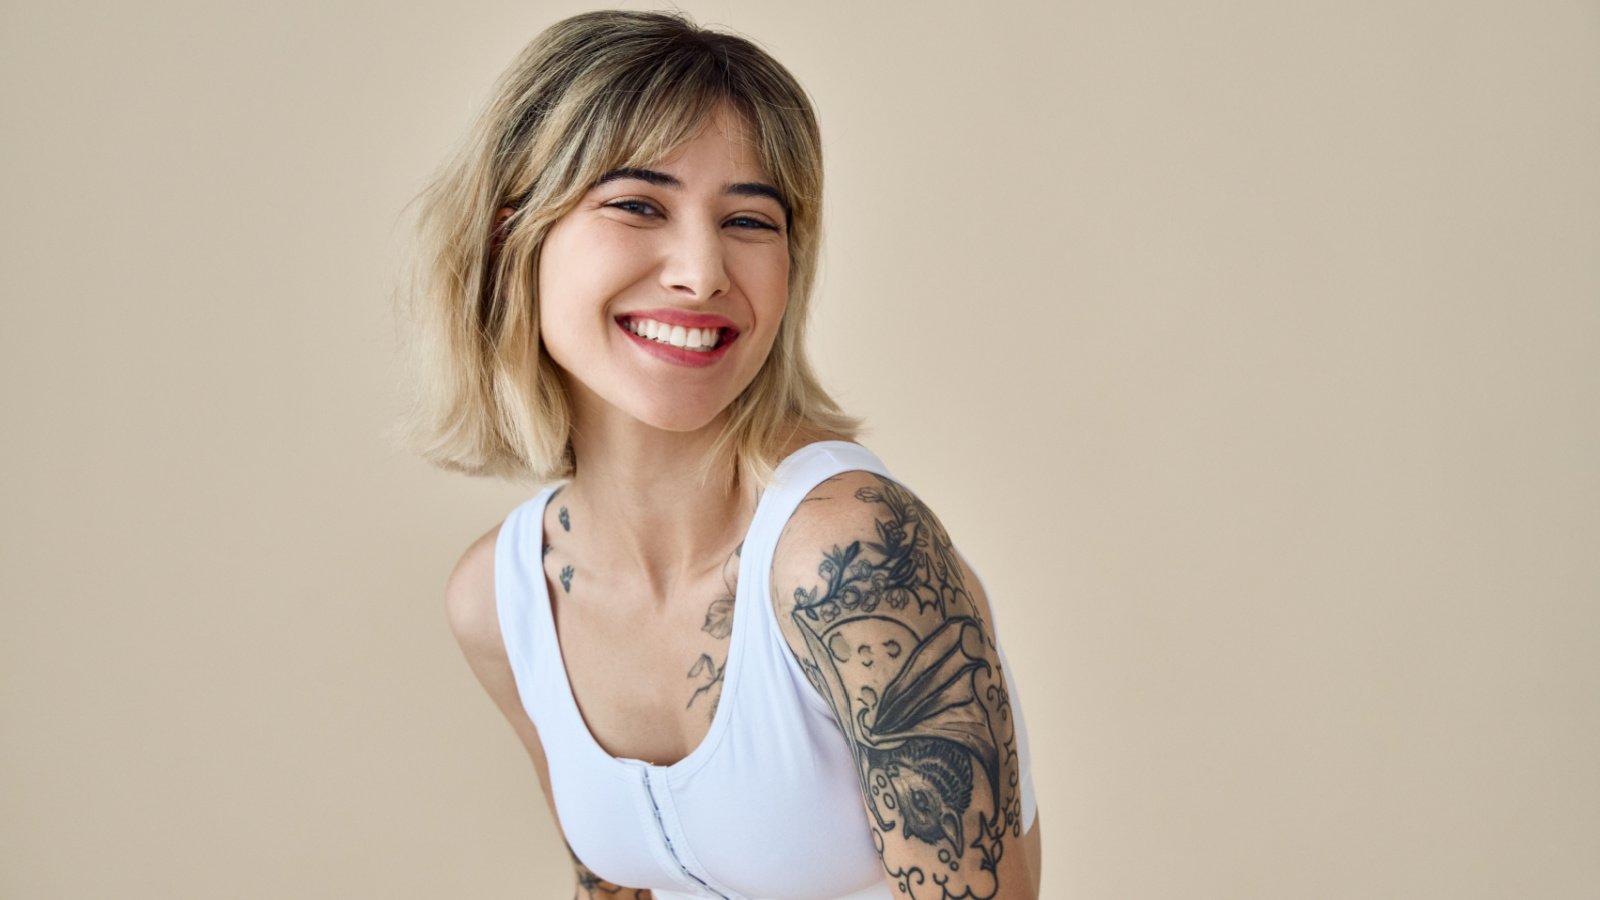 <p>Let’s be honest; we’ve all seen a tattoo that makes us raise an eyebrow. Whether it’s on a first date or just spotting someone in public, certain tattoos can be instant bright red flags. Not to say that everyone with these tattoos is questionable, but they can definitely spark some curious conversations. </p>